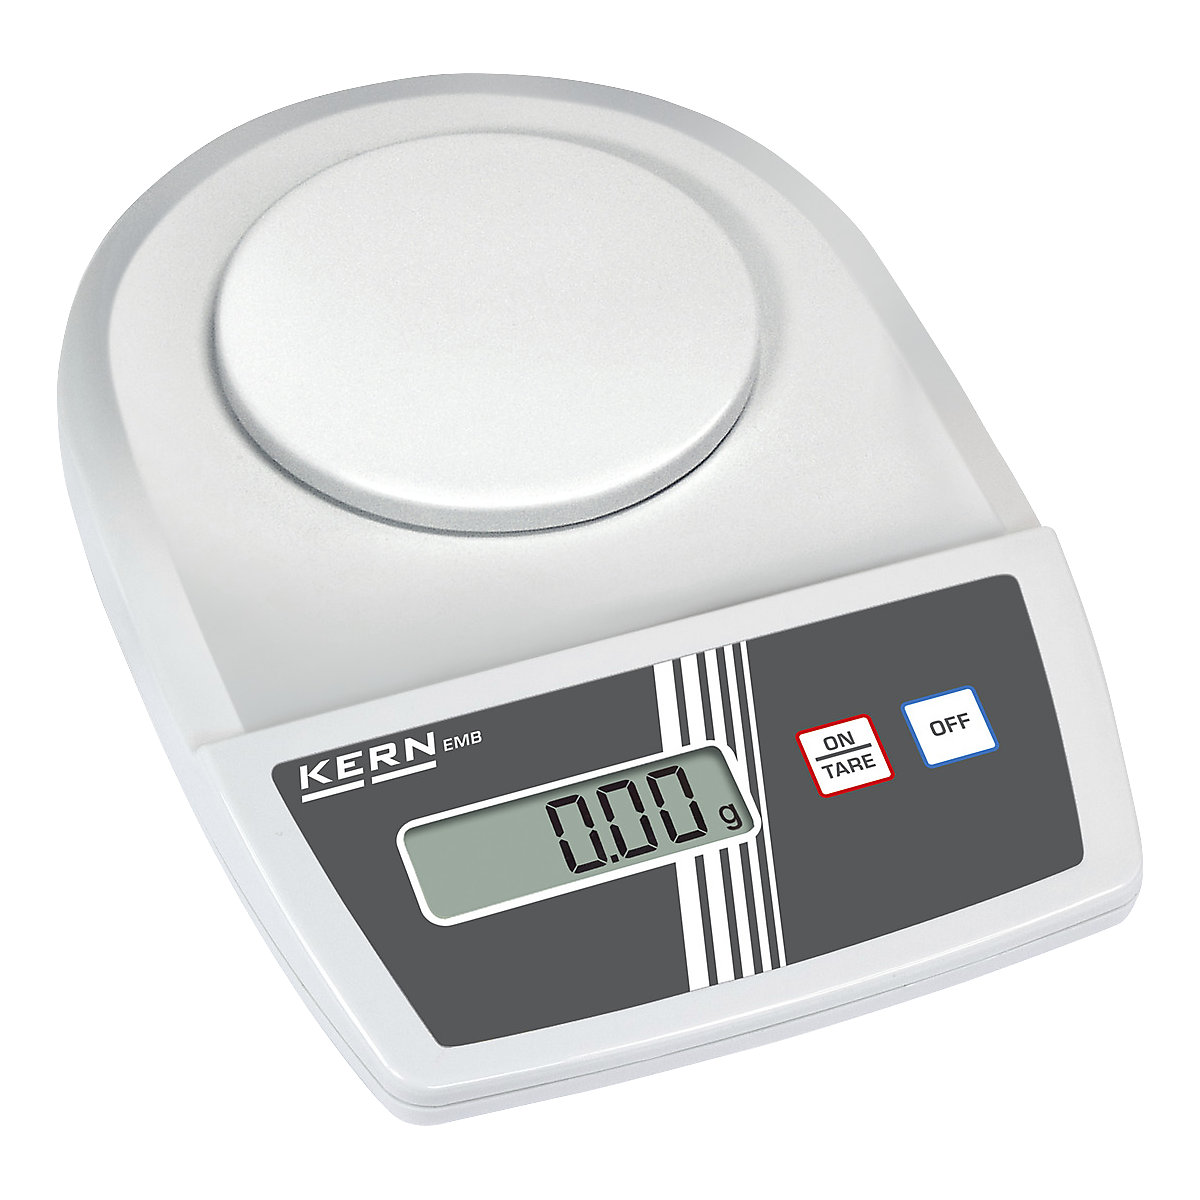 Laboratory scales – KERN, 2 button operation, weighing range up to 600 g, read-out accuracy 0.01 g, weighing plate 105 mm-3